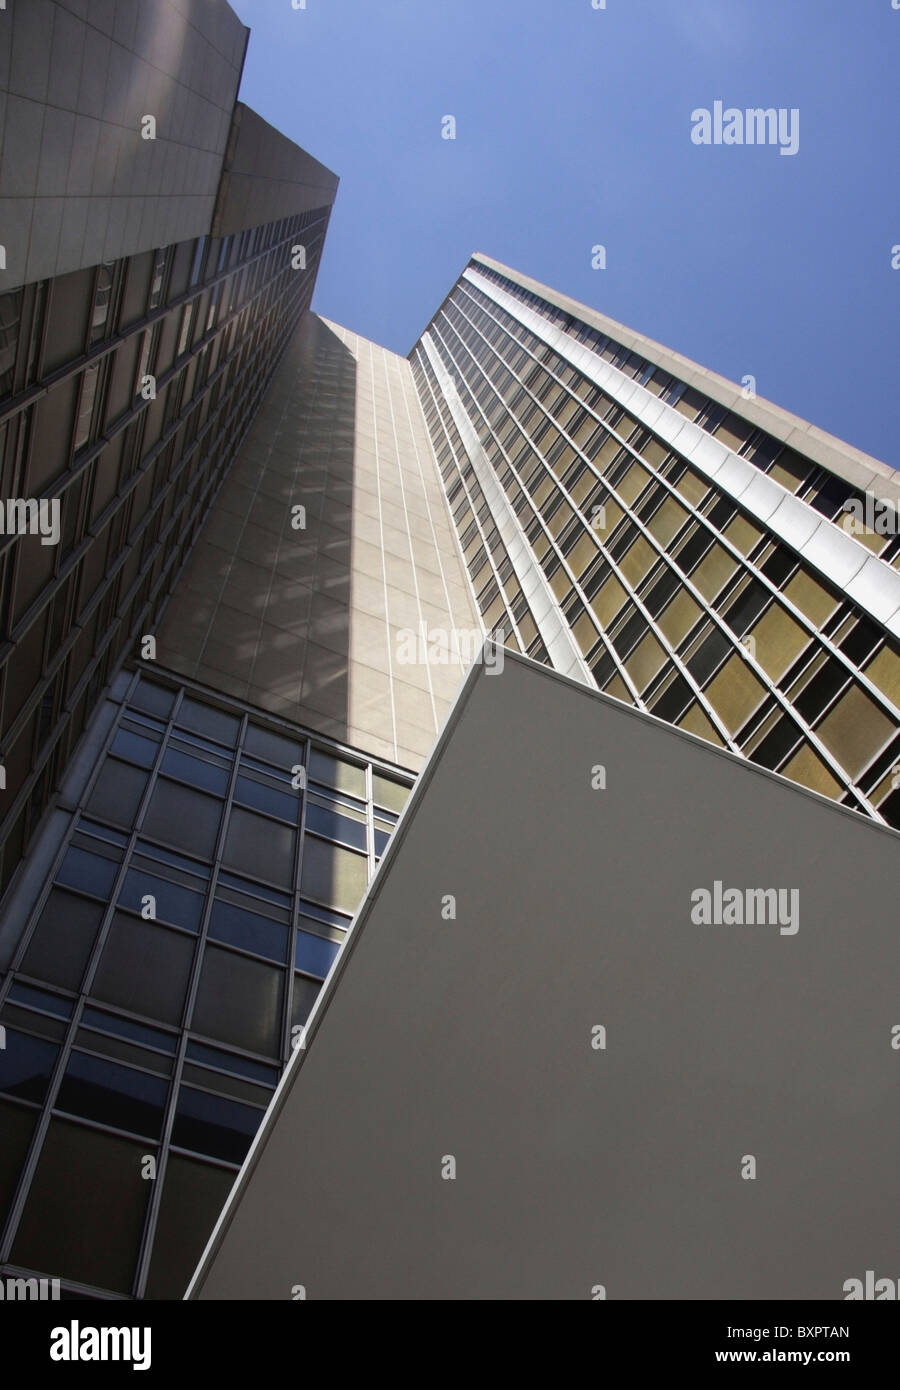 Low Angle View Of Skyscraper Stock Photo